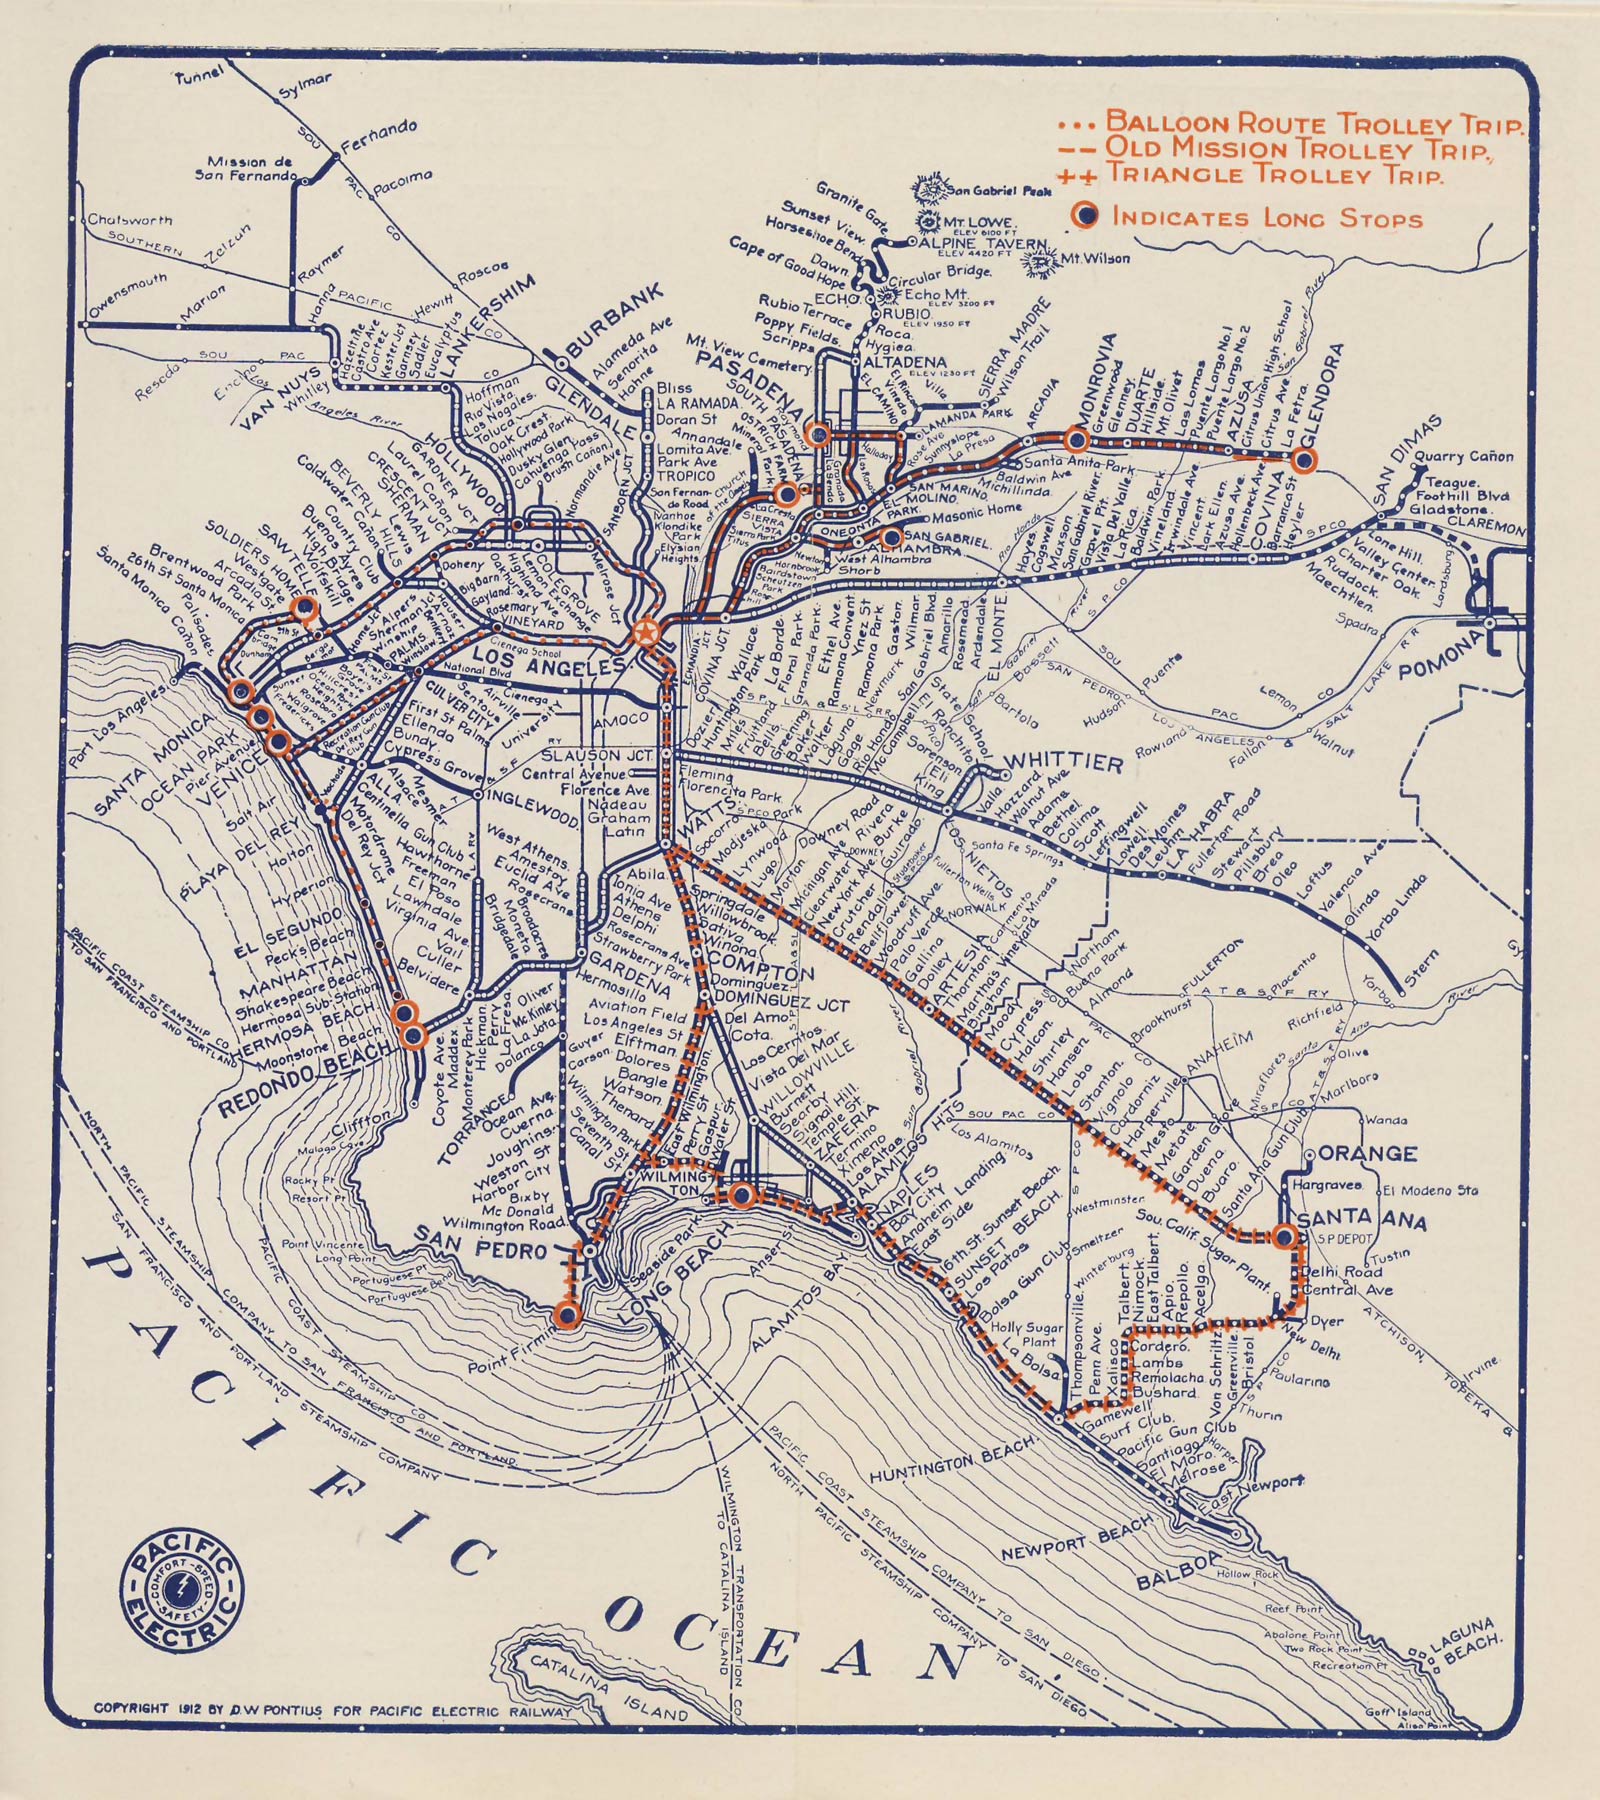 http://www.pacificelectric.org/wp-content/uploads/2012/05/MP-TT-3-Trolley-Trips-Map.jpg